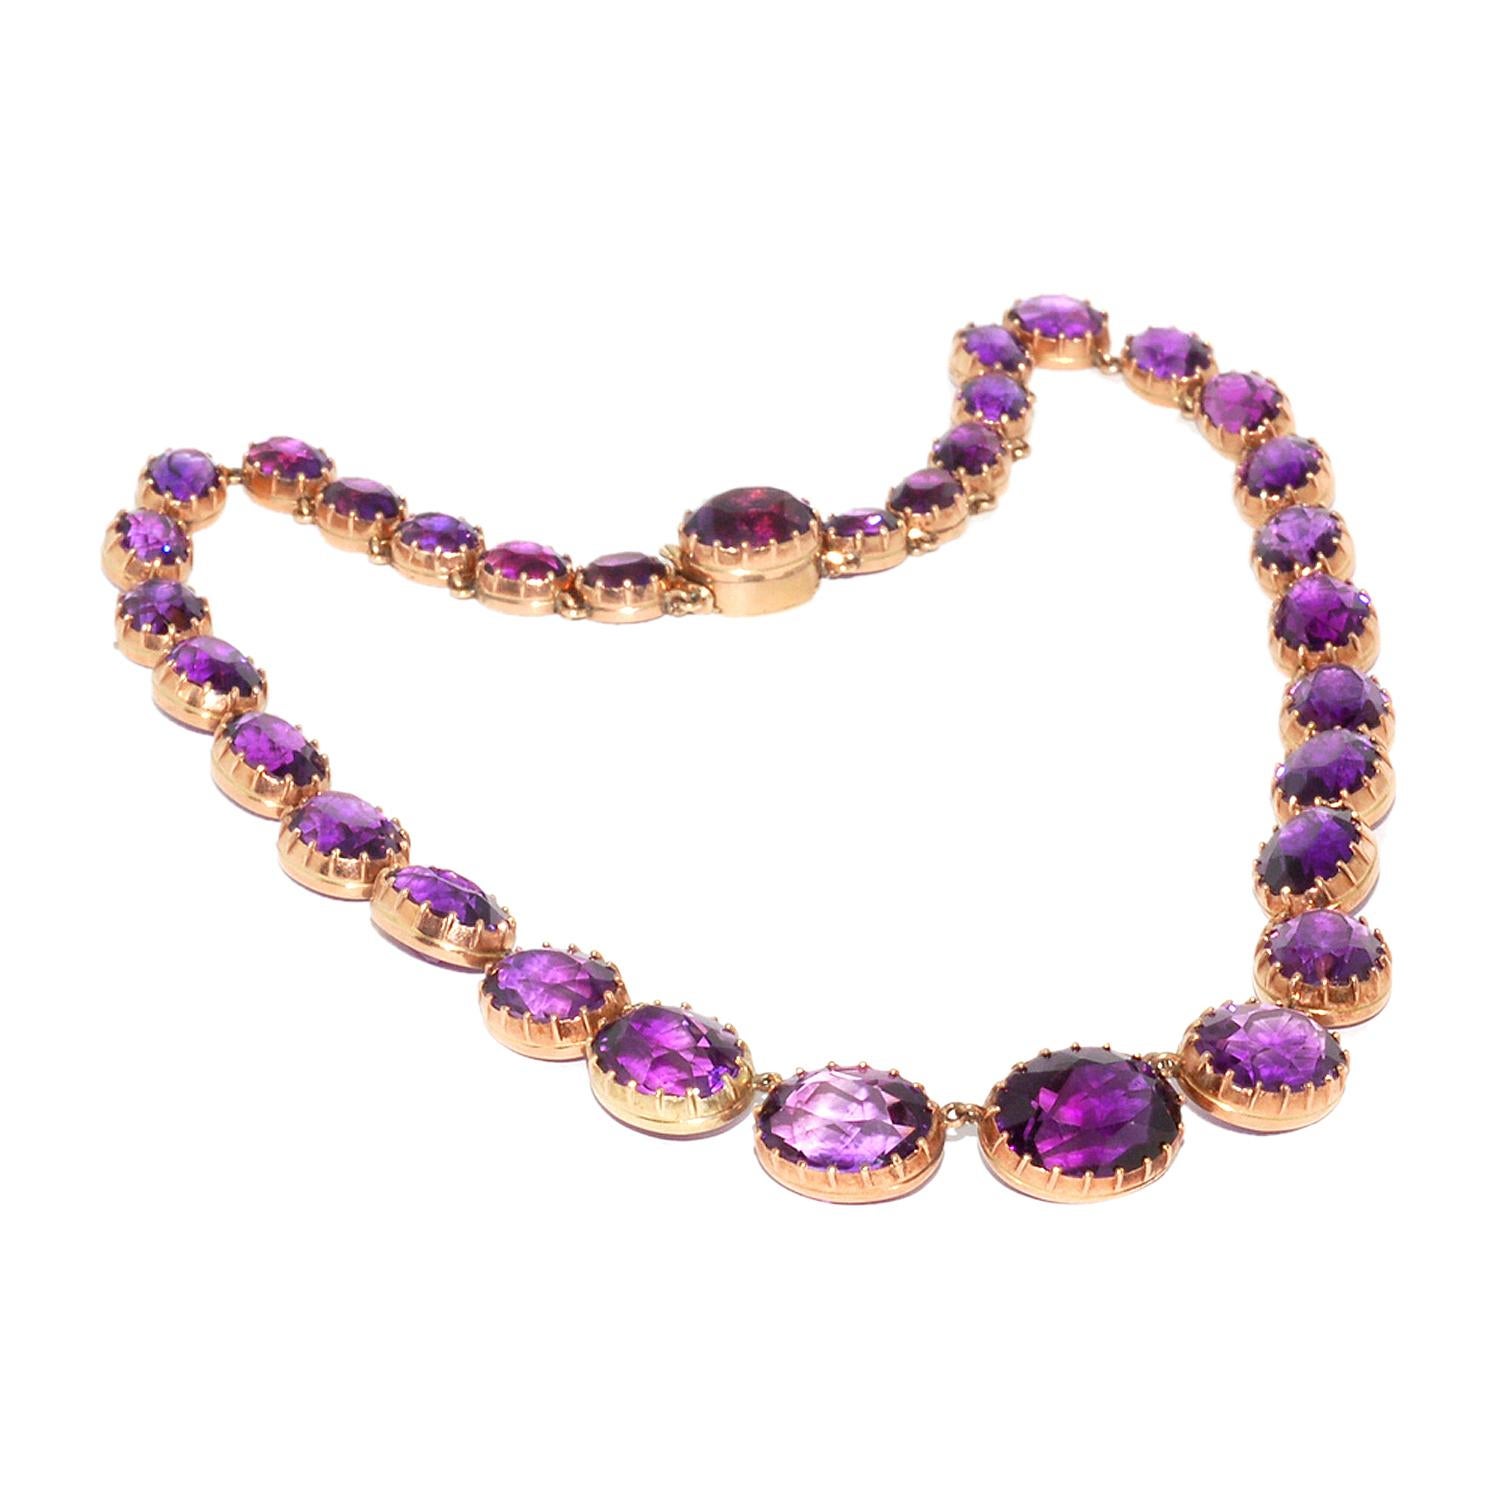 Victorian Amethyst Riviere Necklace

This exquisite Victorian amethyst riviere necklace is designed as a graduated series of oval-cut amethyst stones, each set in 15k rose gold.  A bright, classic design that is easy to wear and an excellent choice